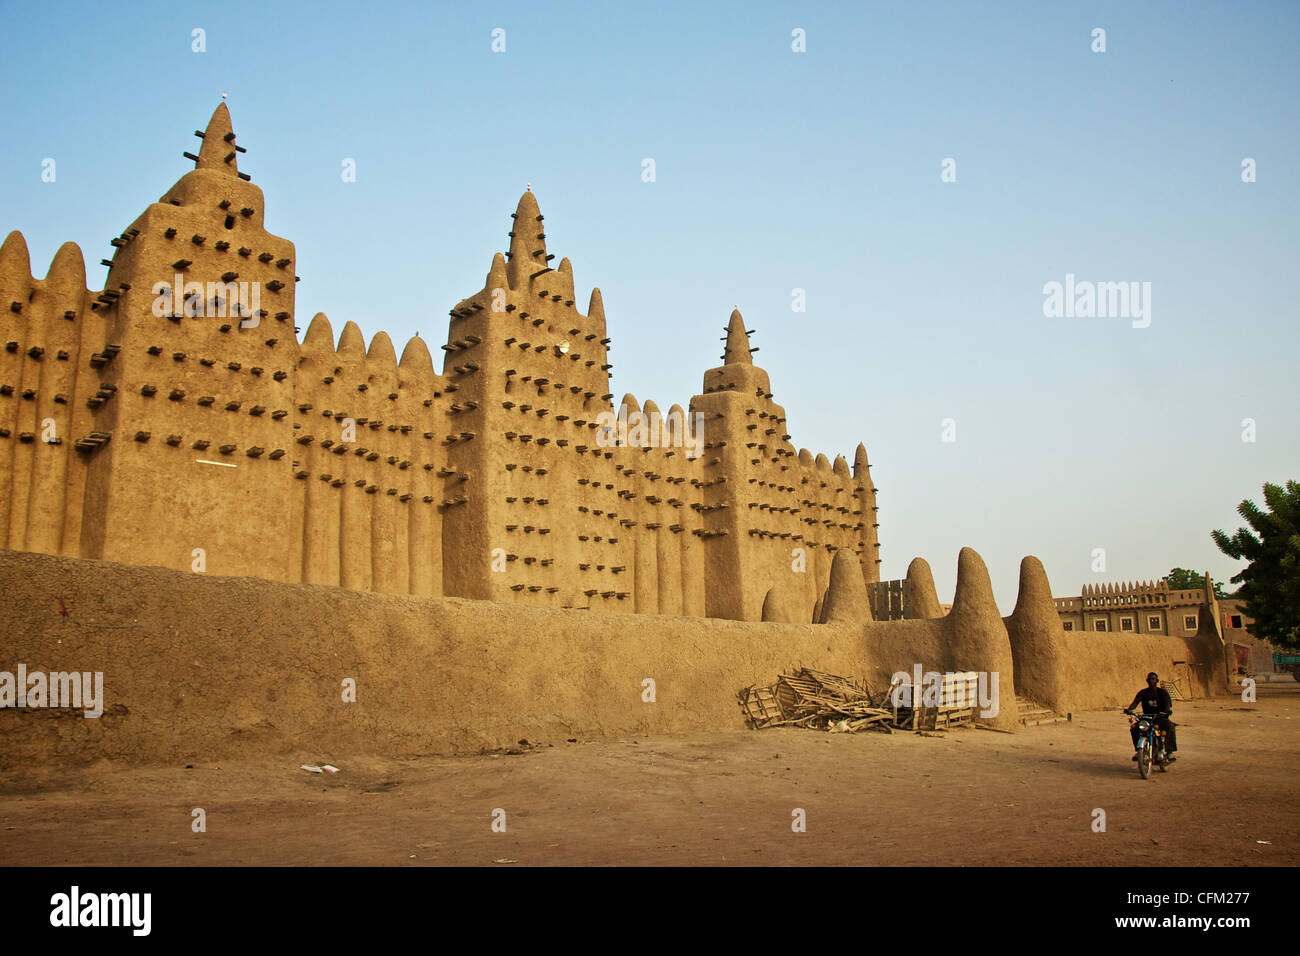 A man rides his motorbike by the Great Mosque of Djenne in Djenne, Mali. Stock Photo